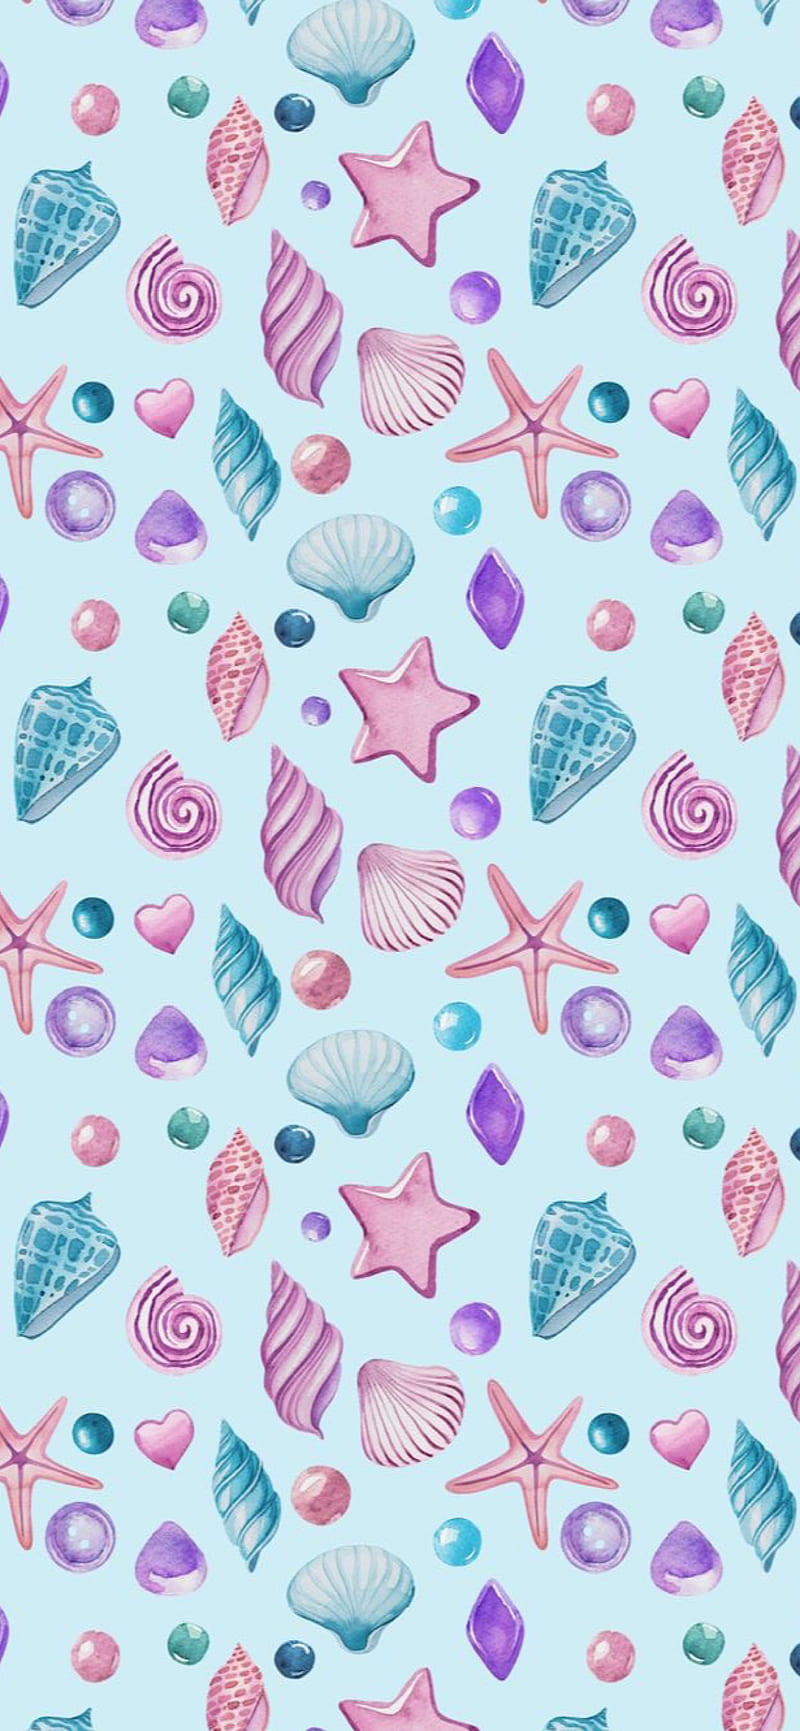 White Seashells In Waves iPhone Wallpapers Free Download